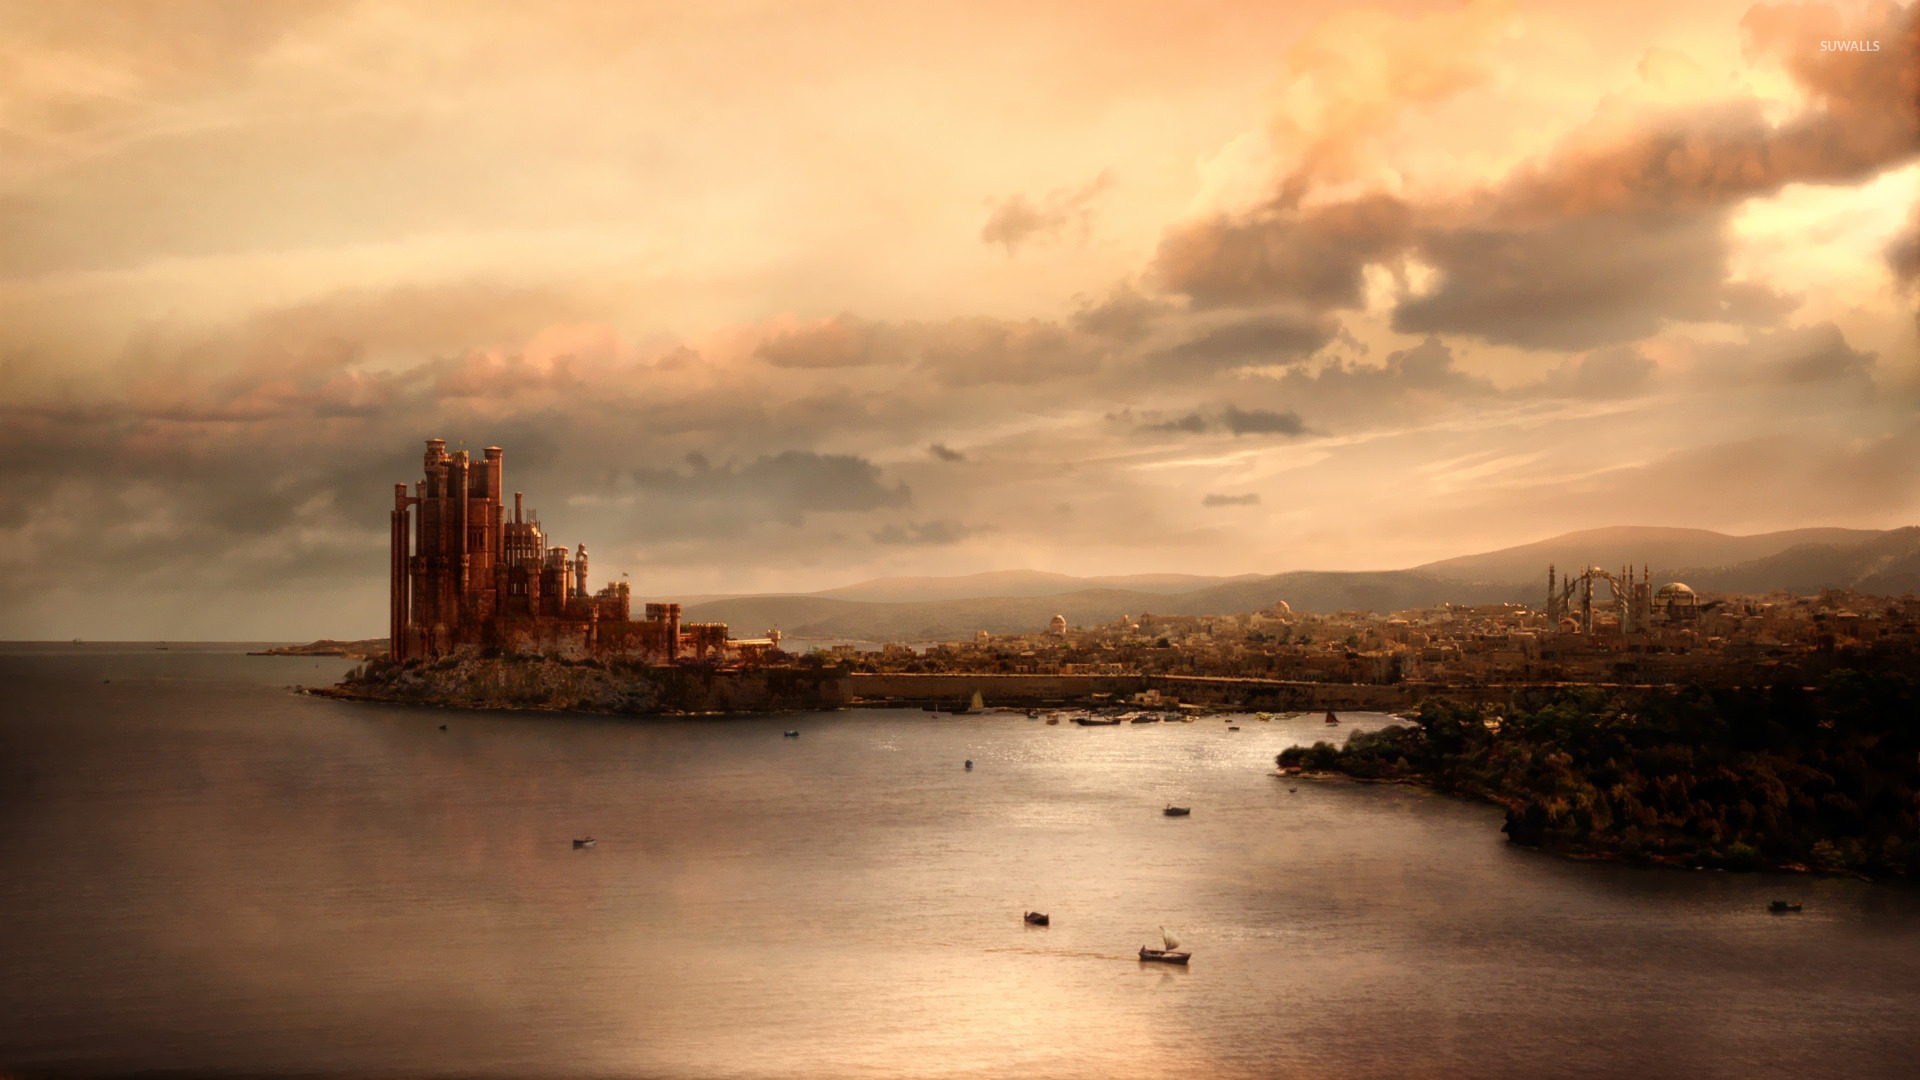 game of thrones background 4k